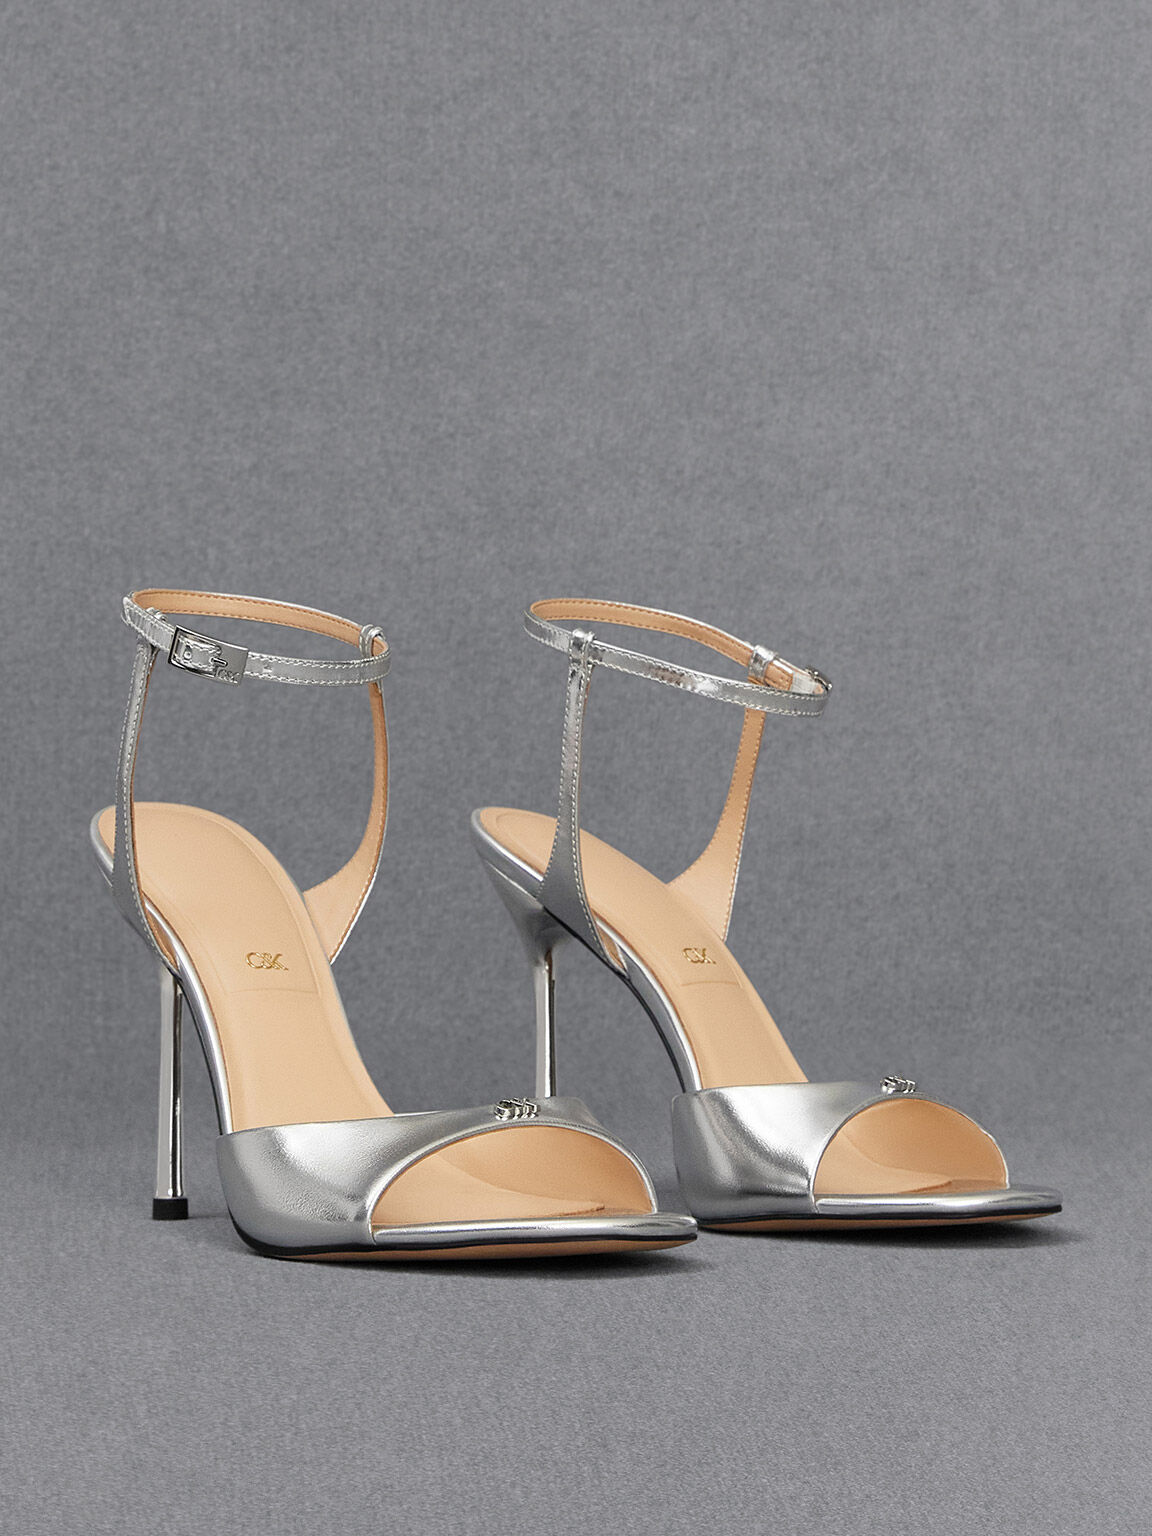 8 Metallic Heels To Pair With Your Every Party Look